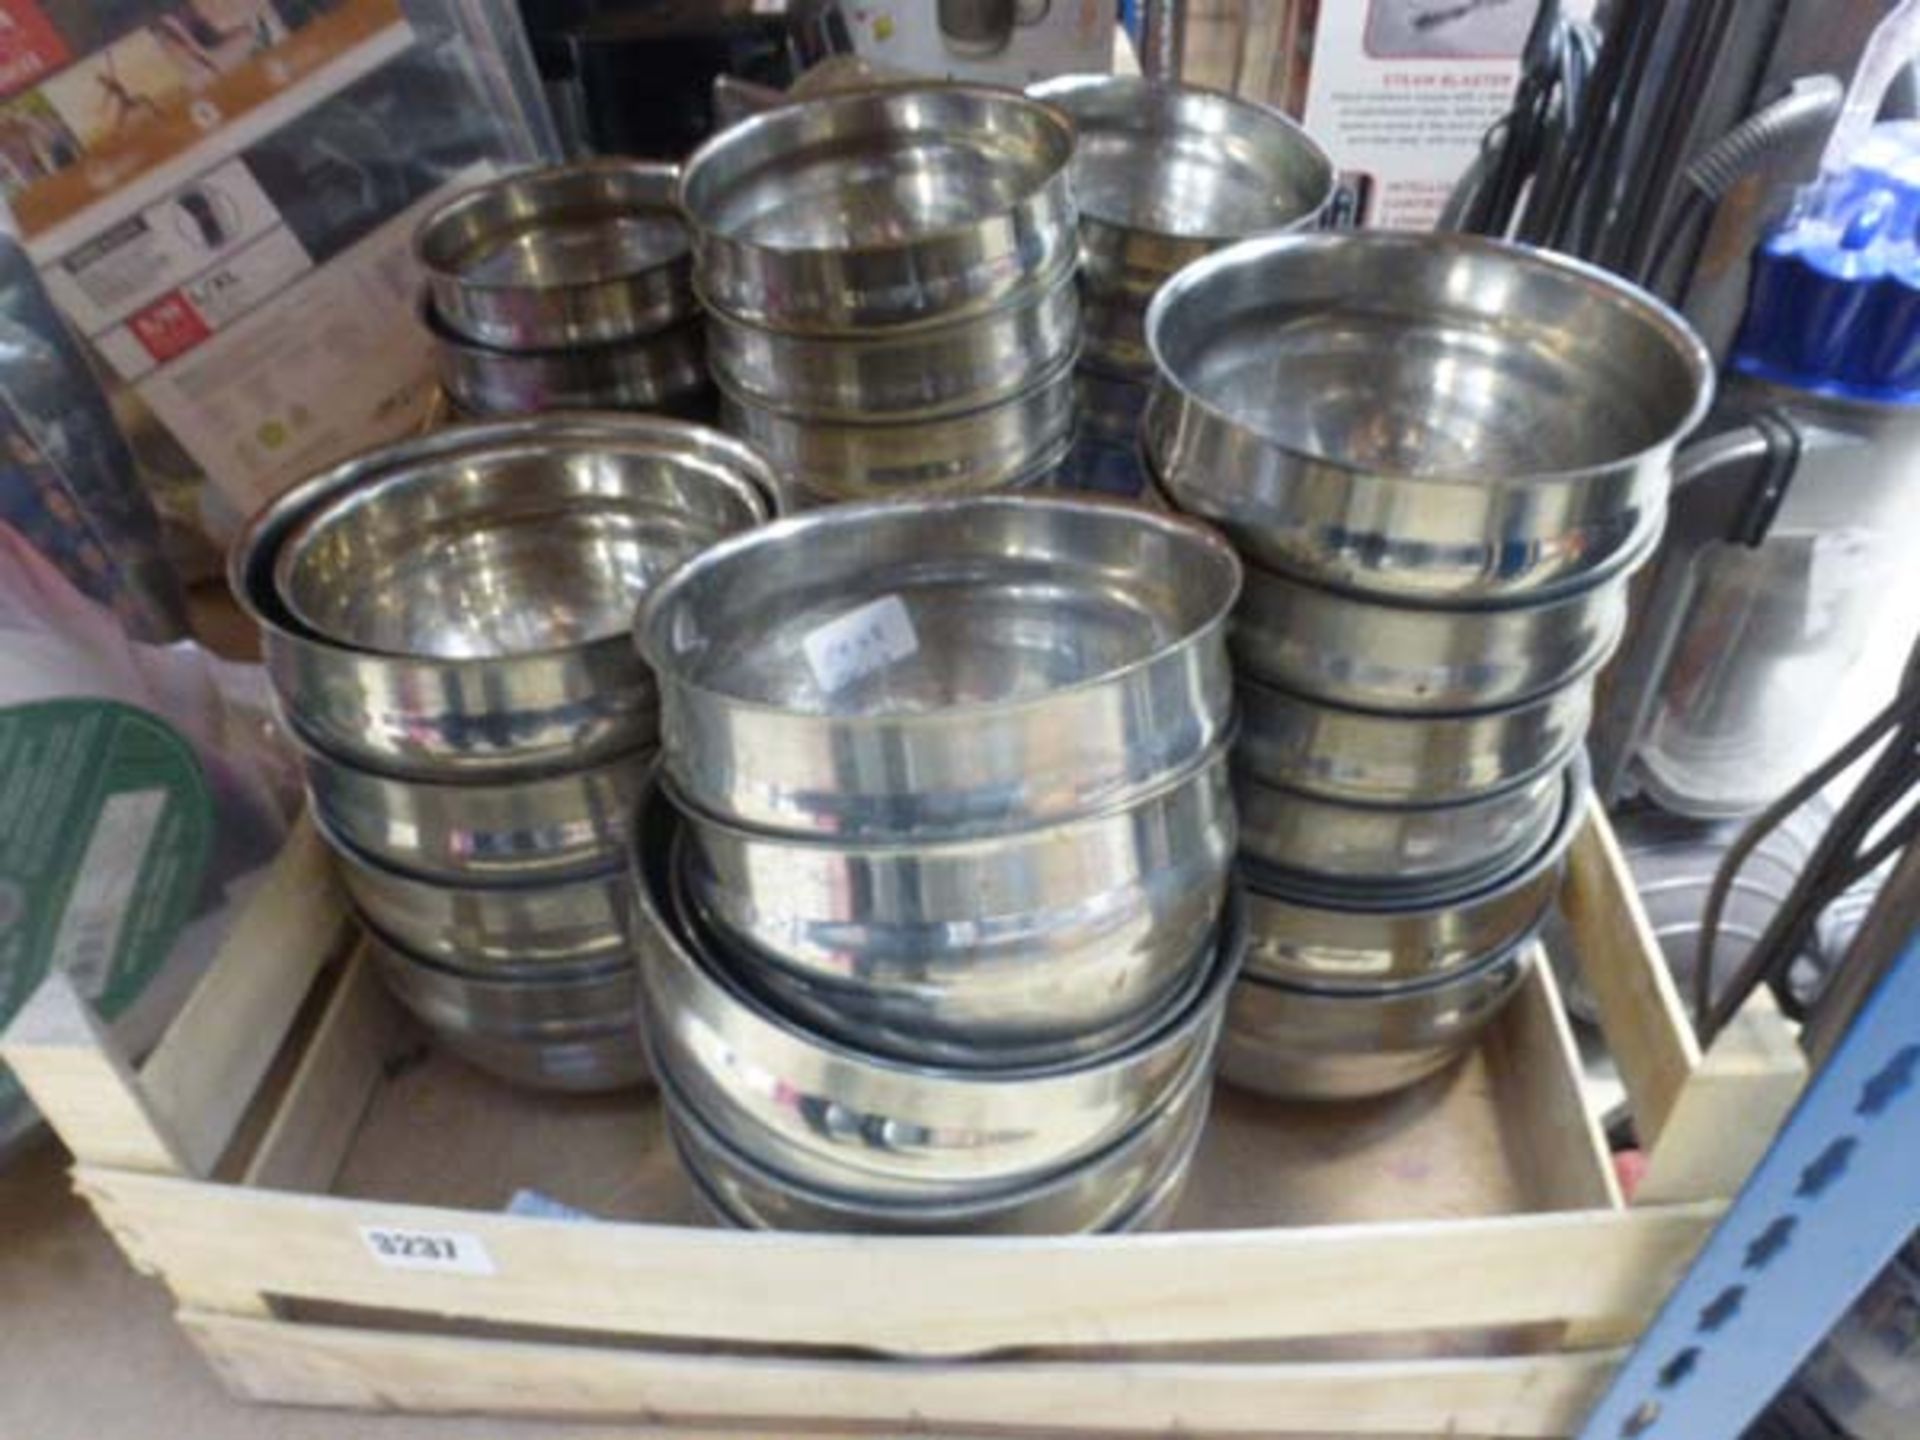 2 trays of stainless steel serving bowls